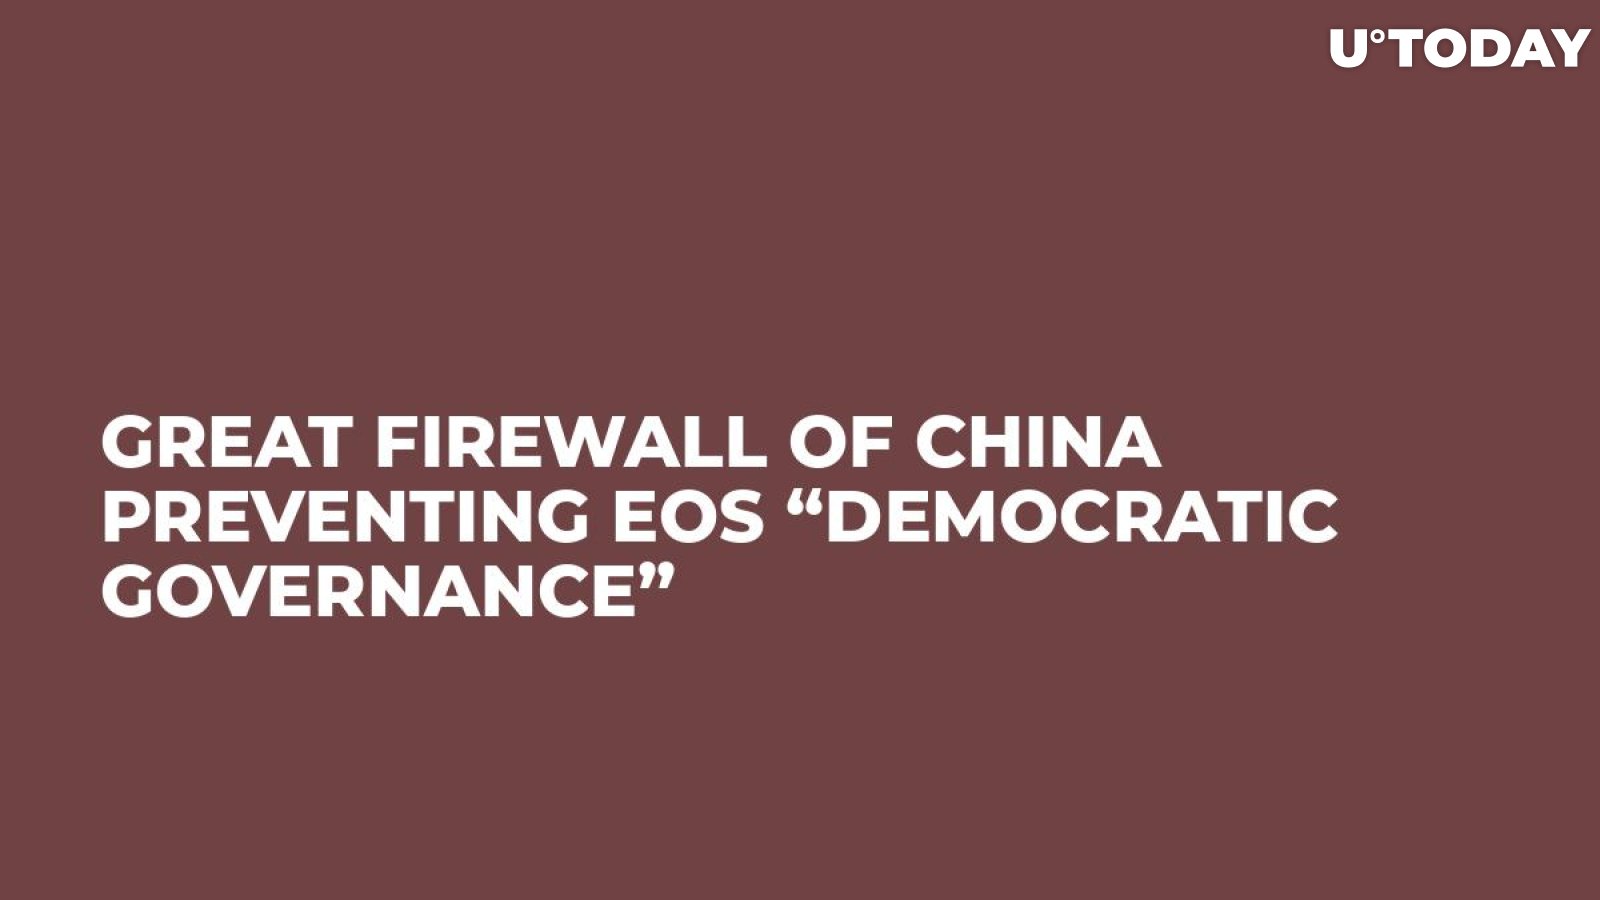 Great Firewall of China Preventing EOS “Democratic Governance”